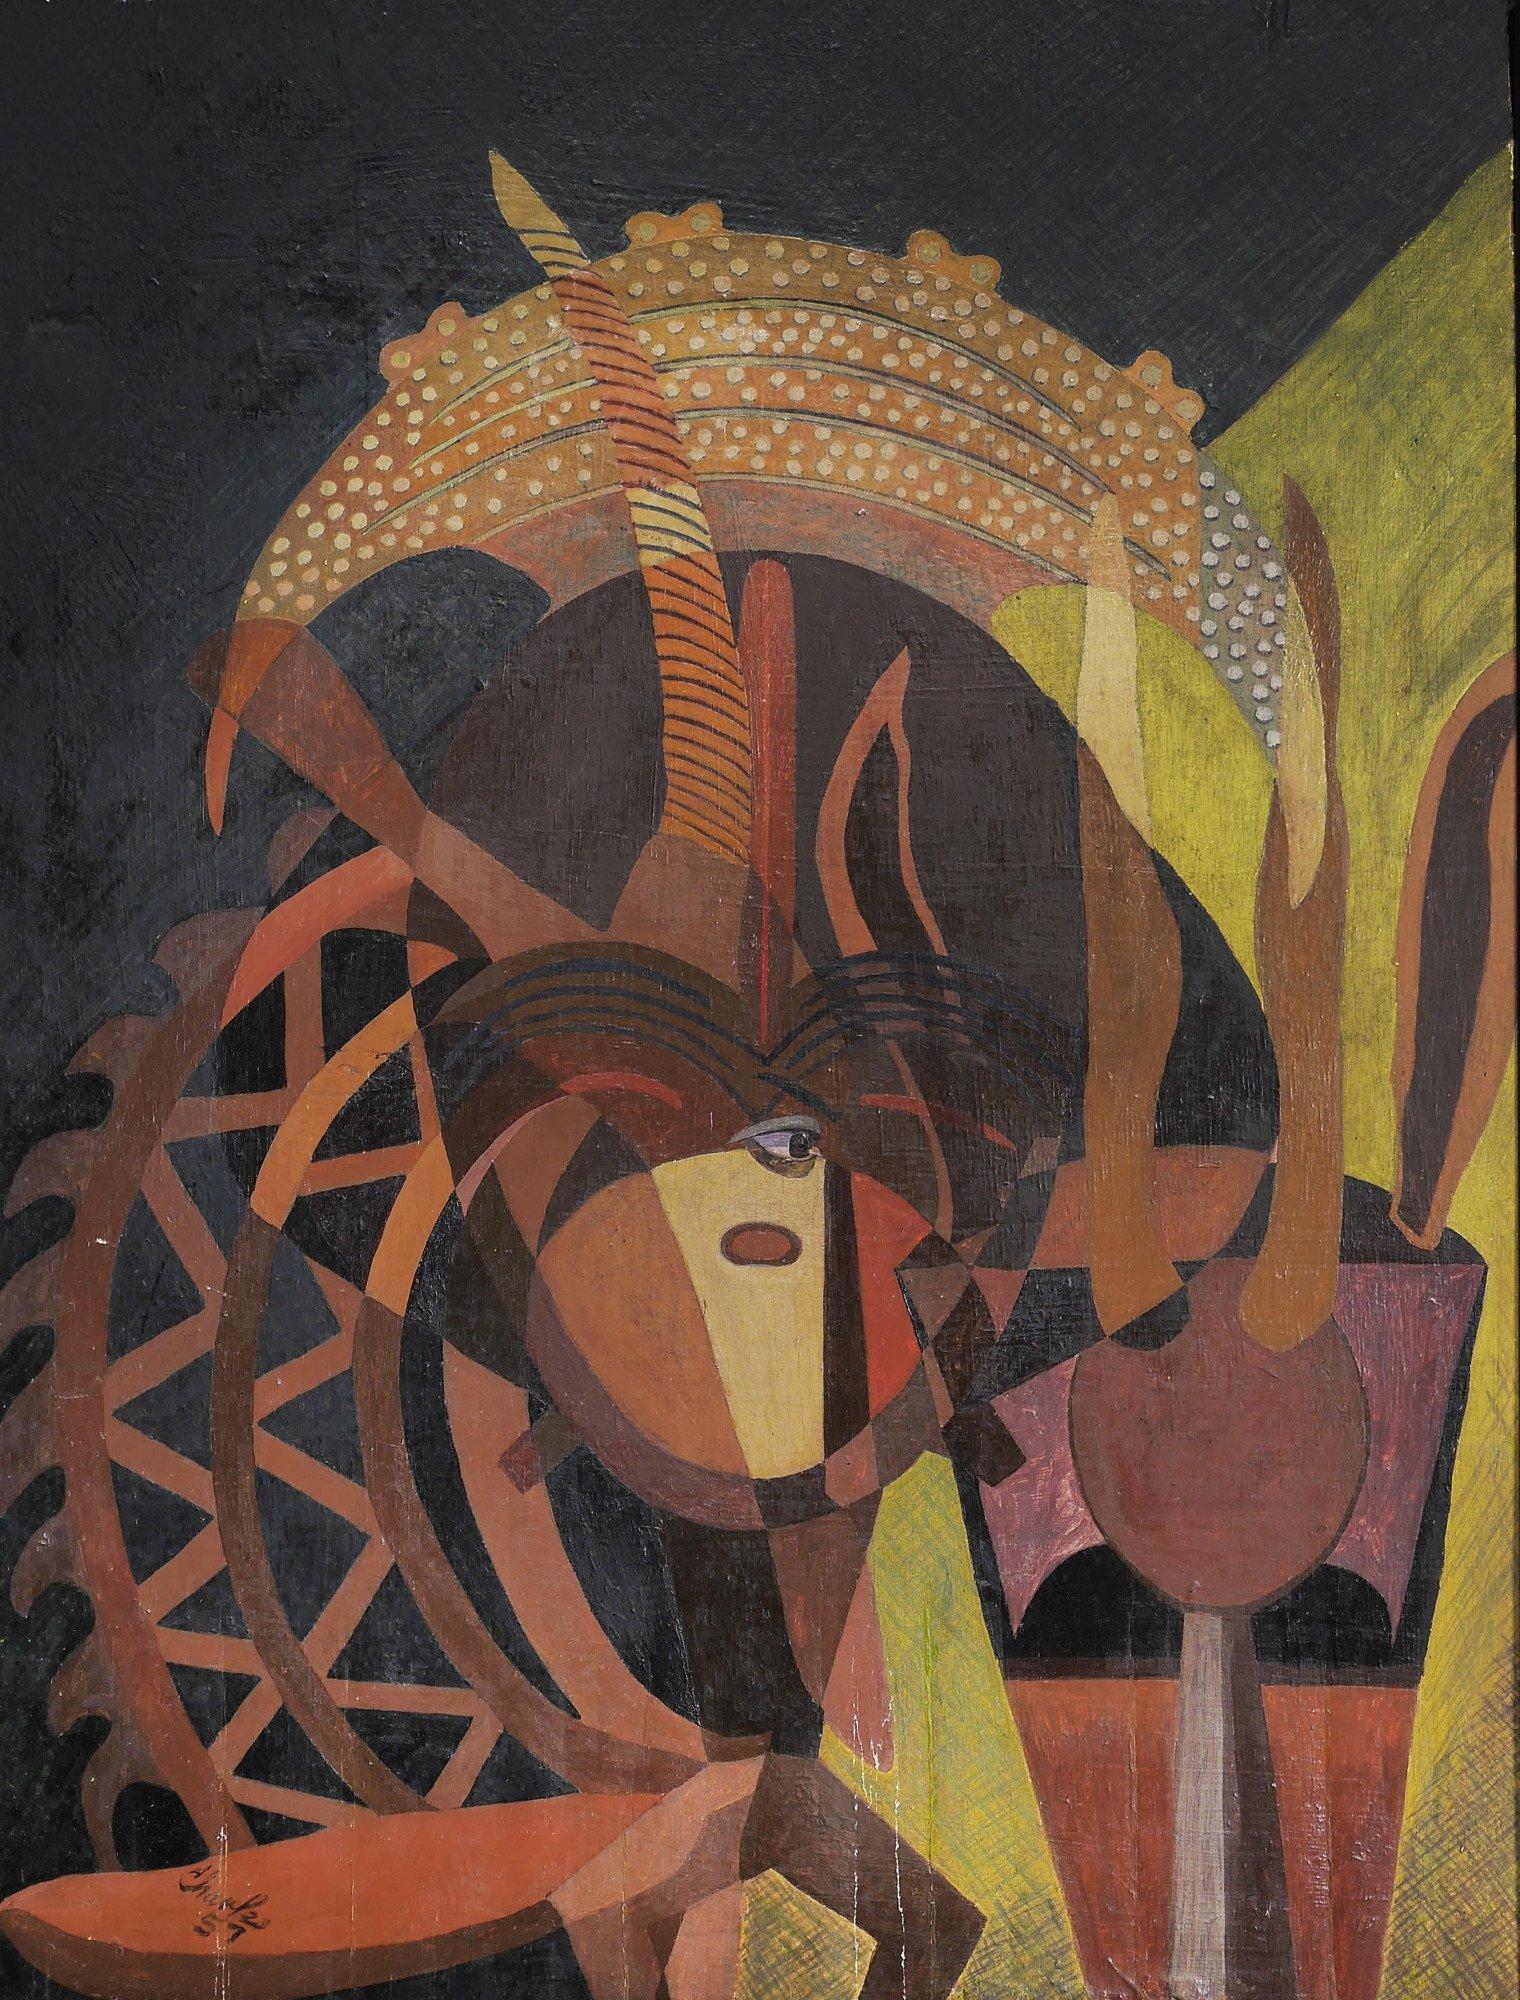 Meditation on African Sculpture, mid-century figural abstract painting - Modern Painting by Beni E. Kosh